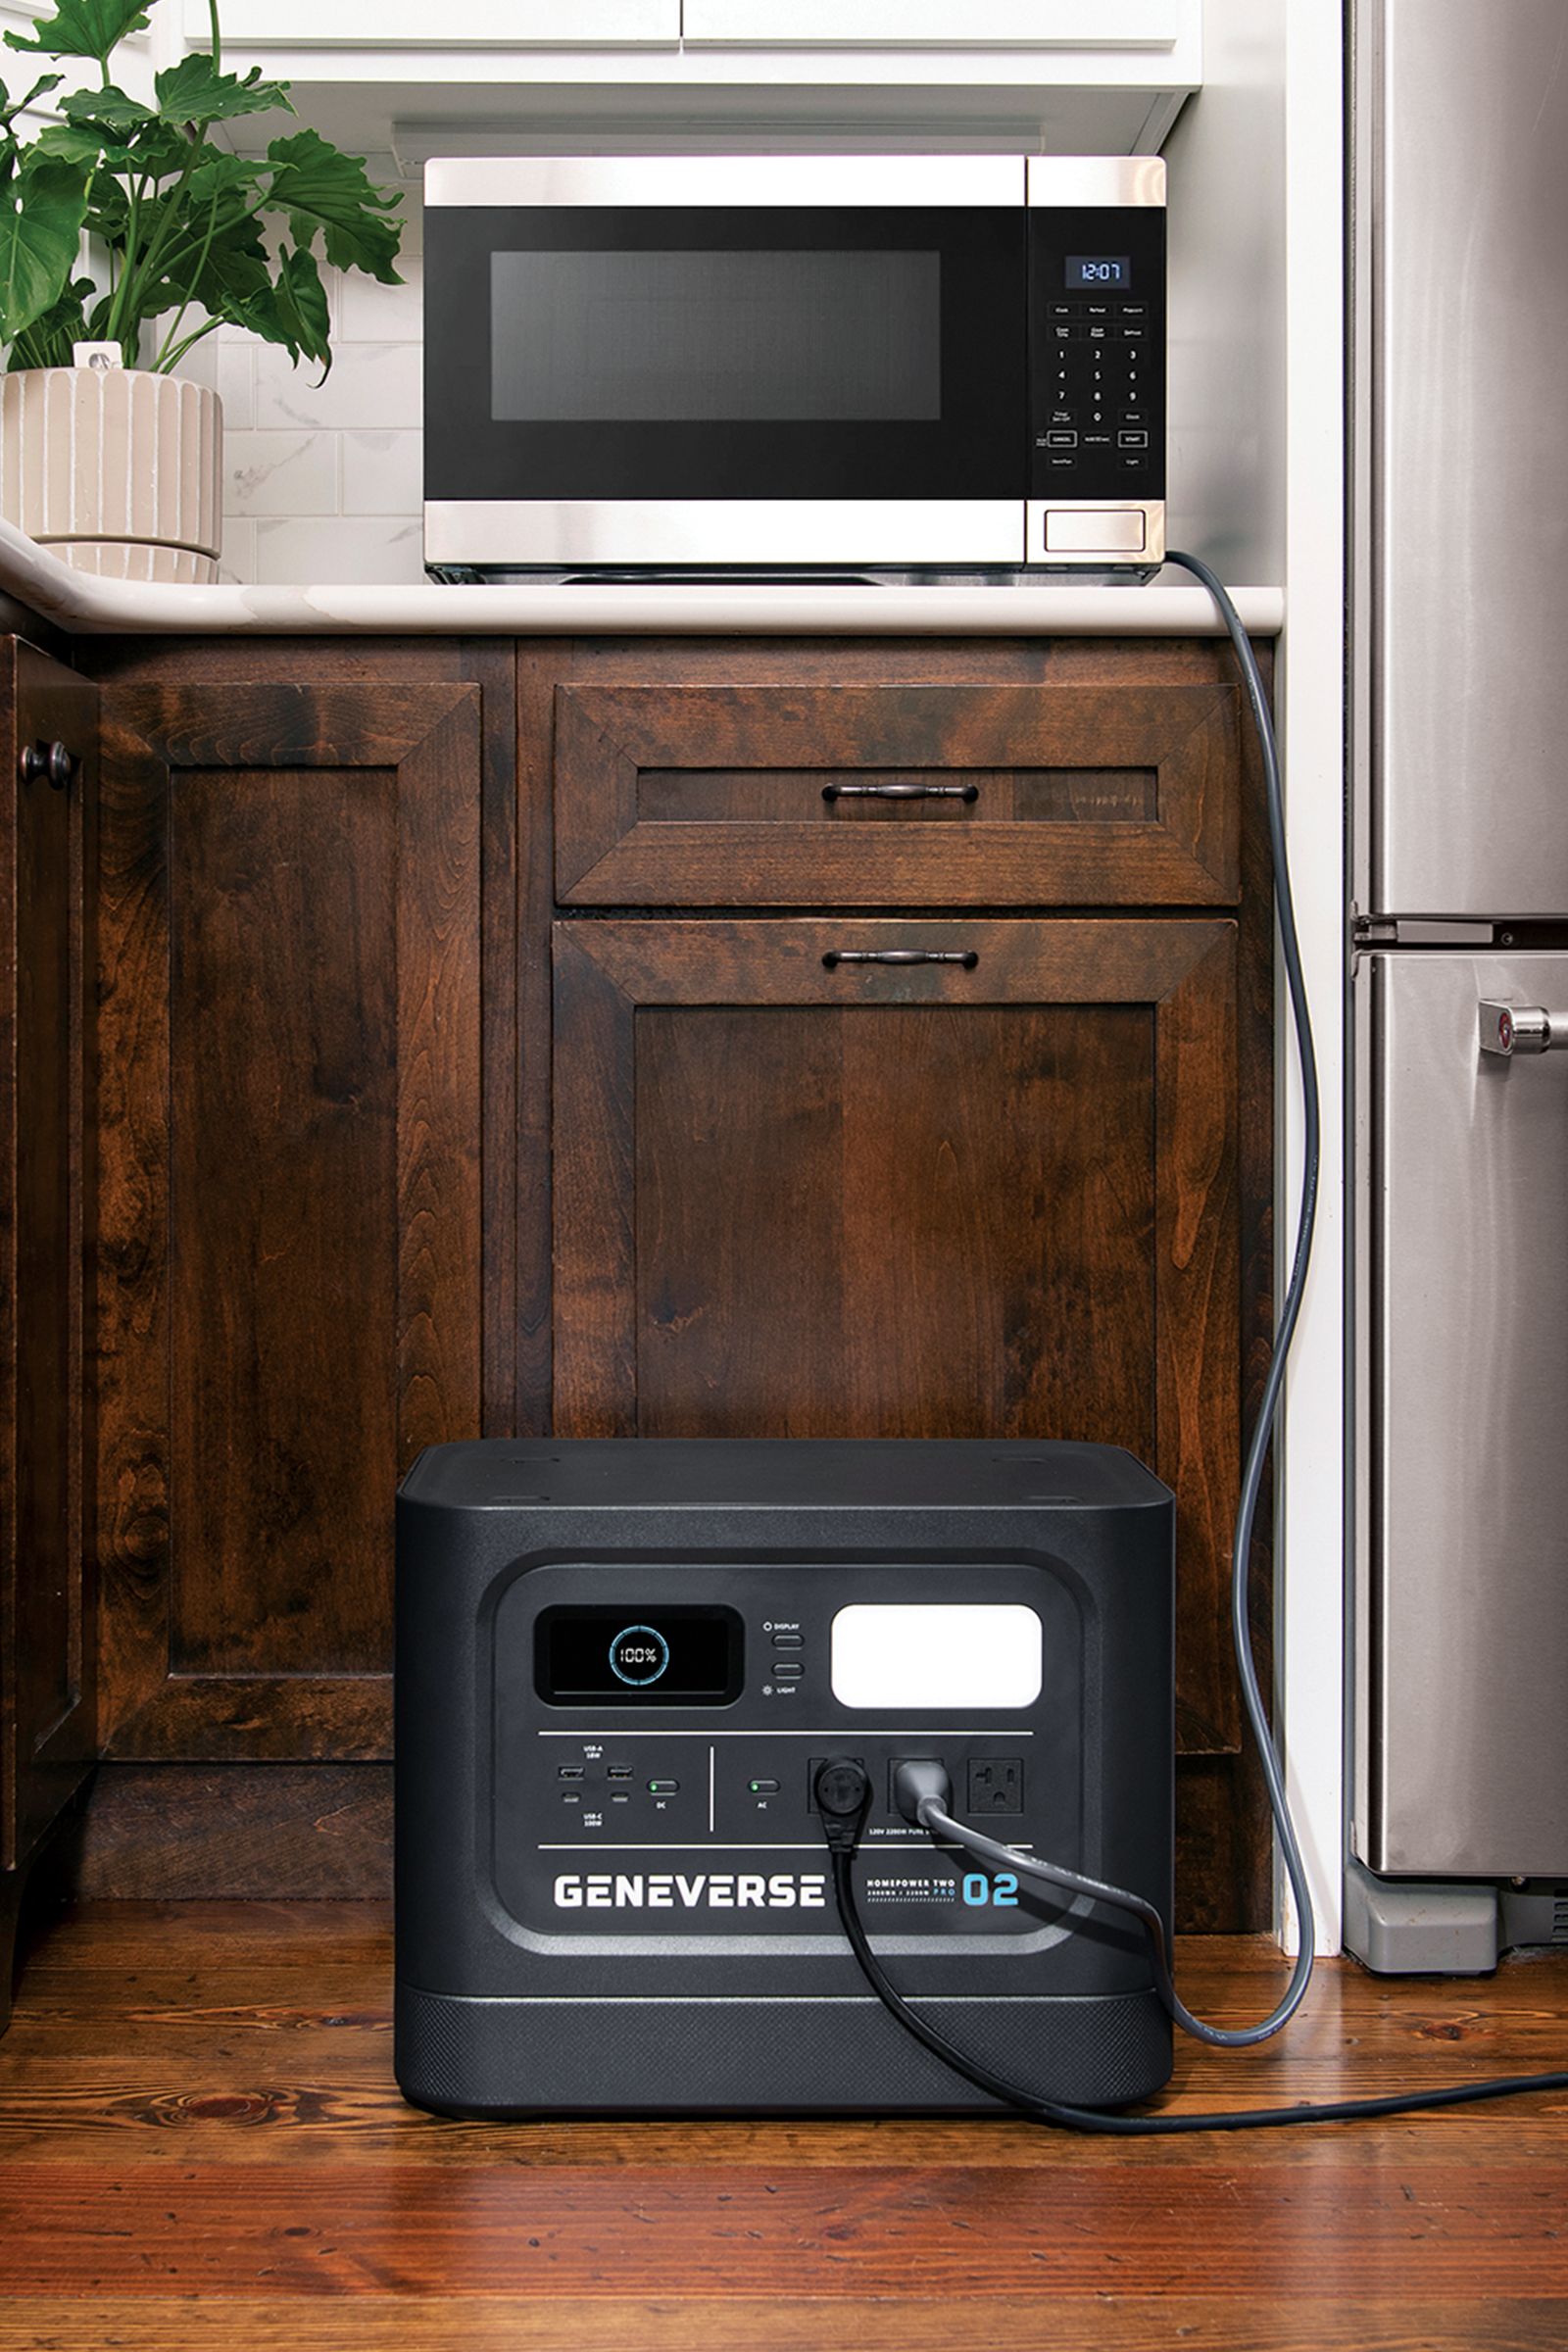 Using a portable power station to charge kitchen appliances